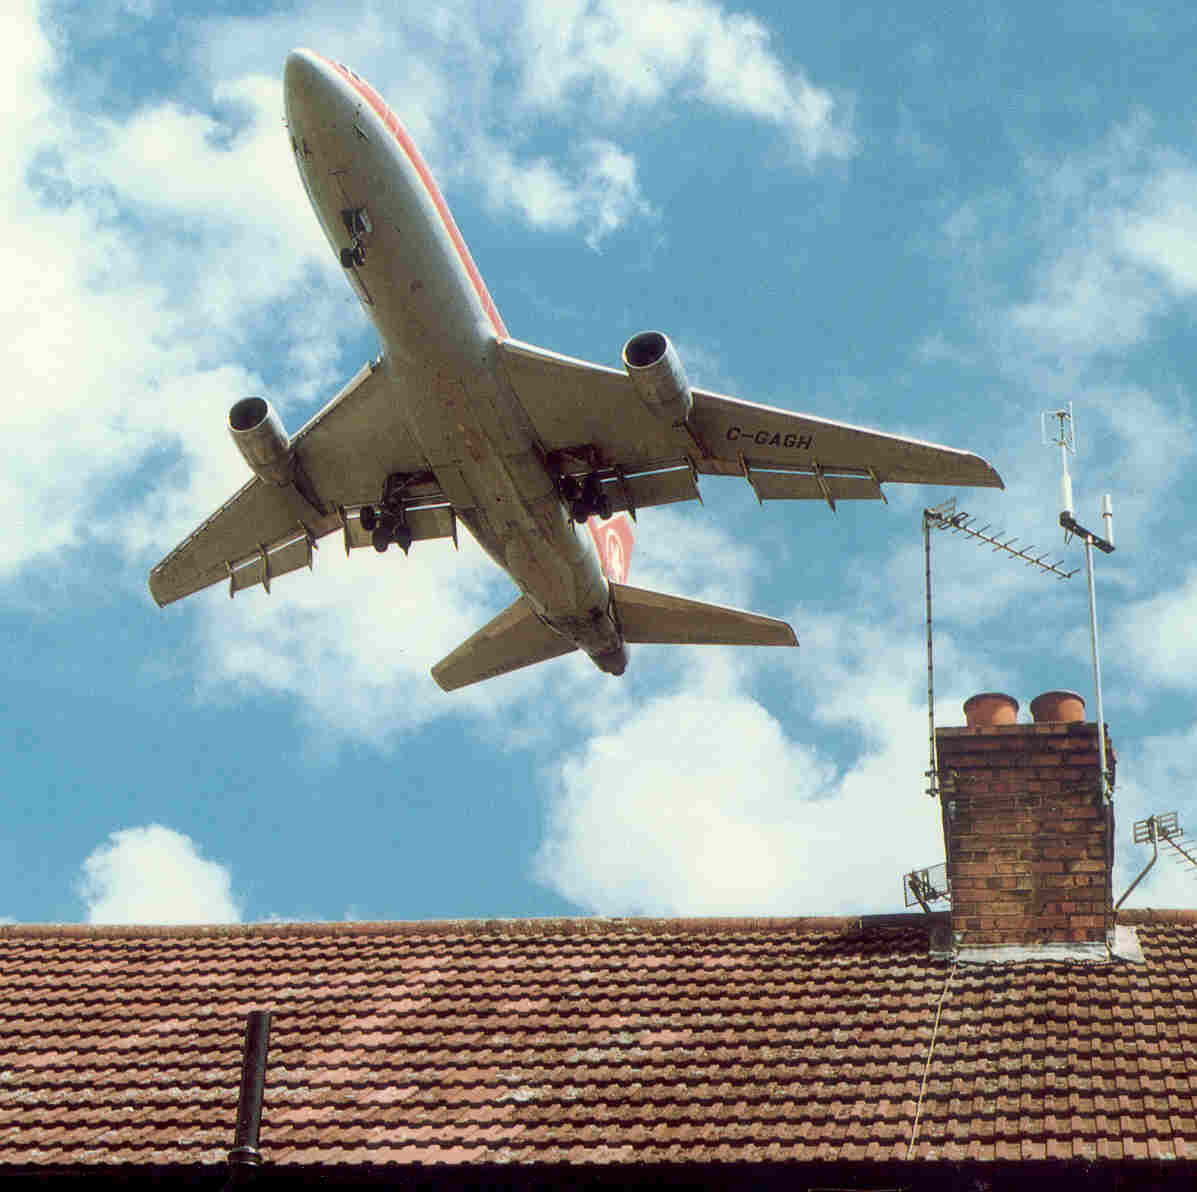 Plane over house